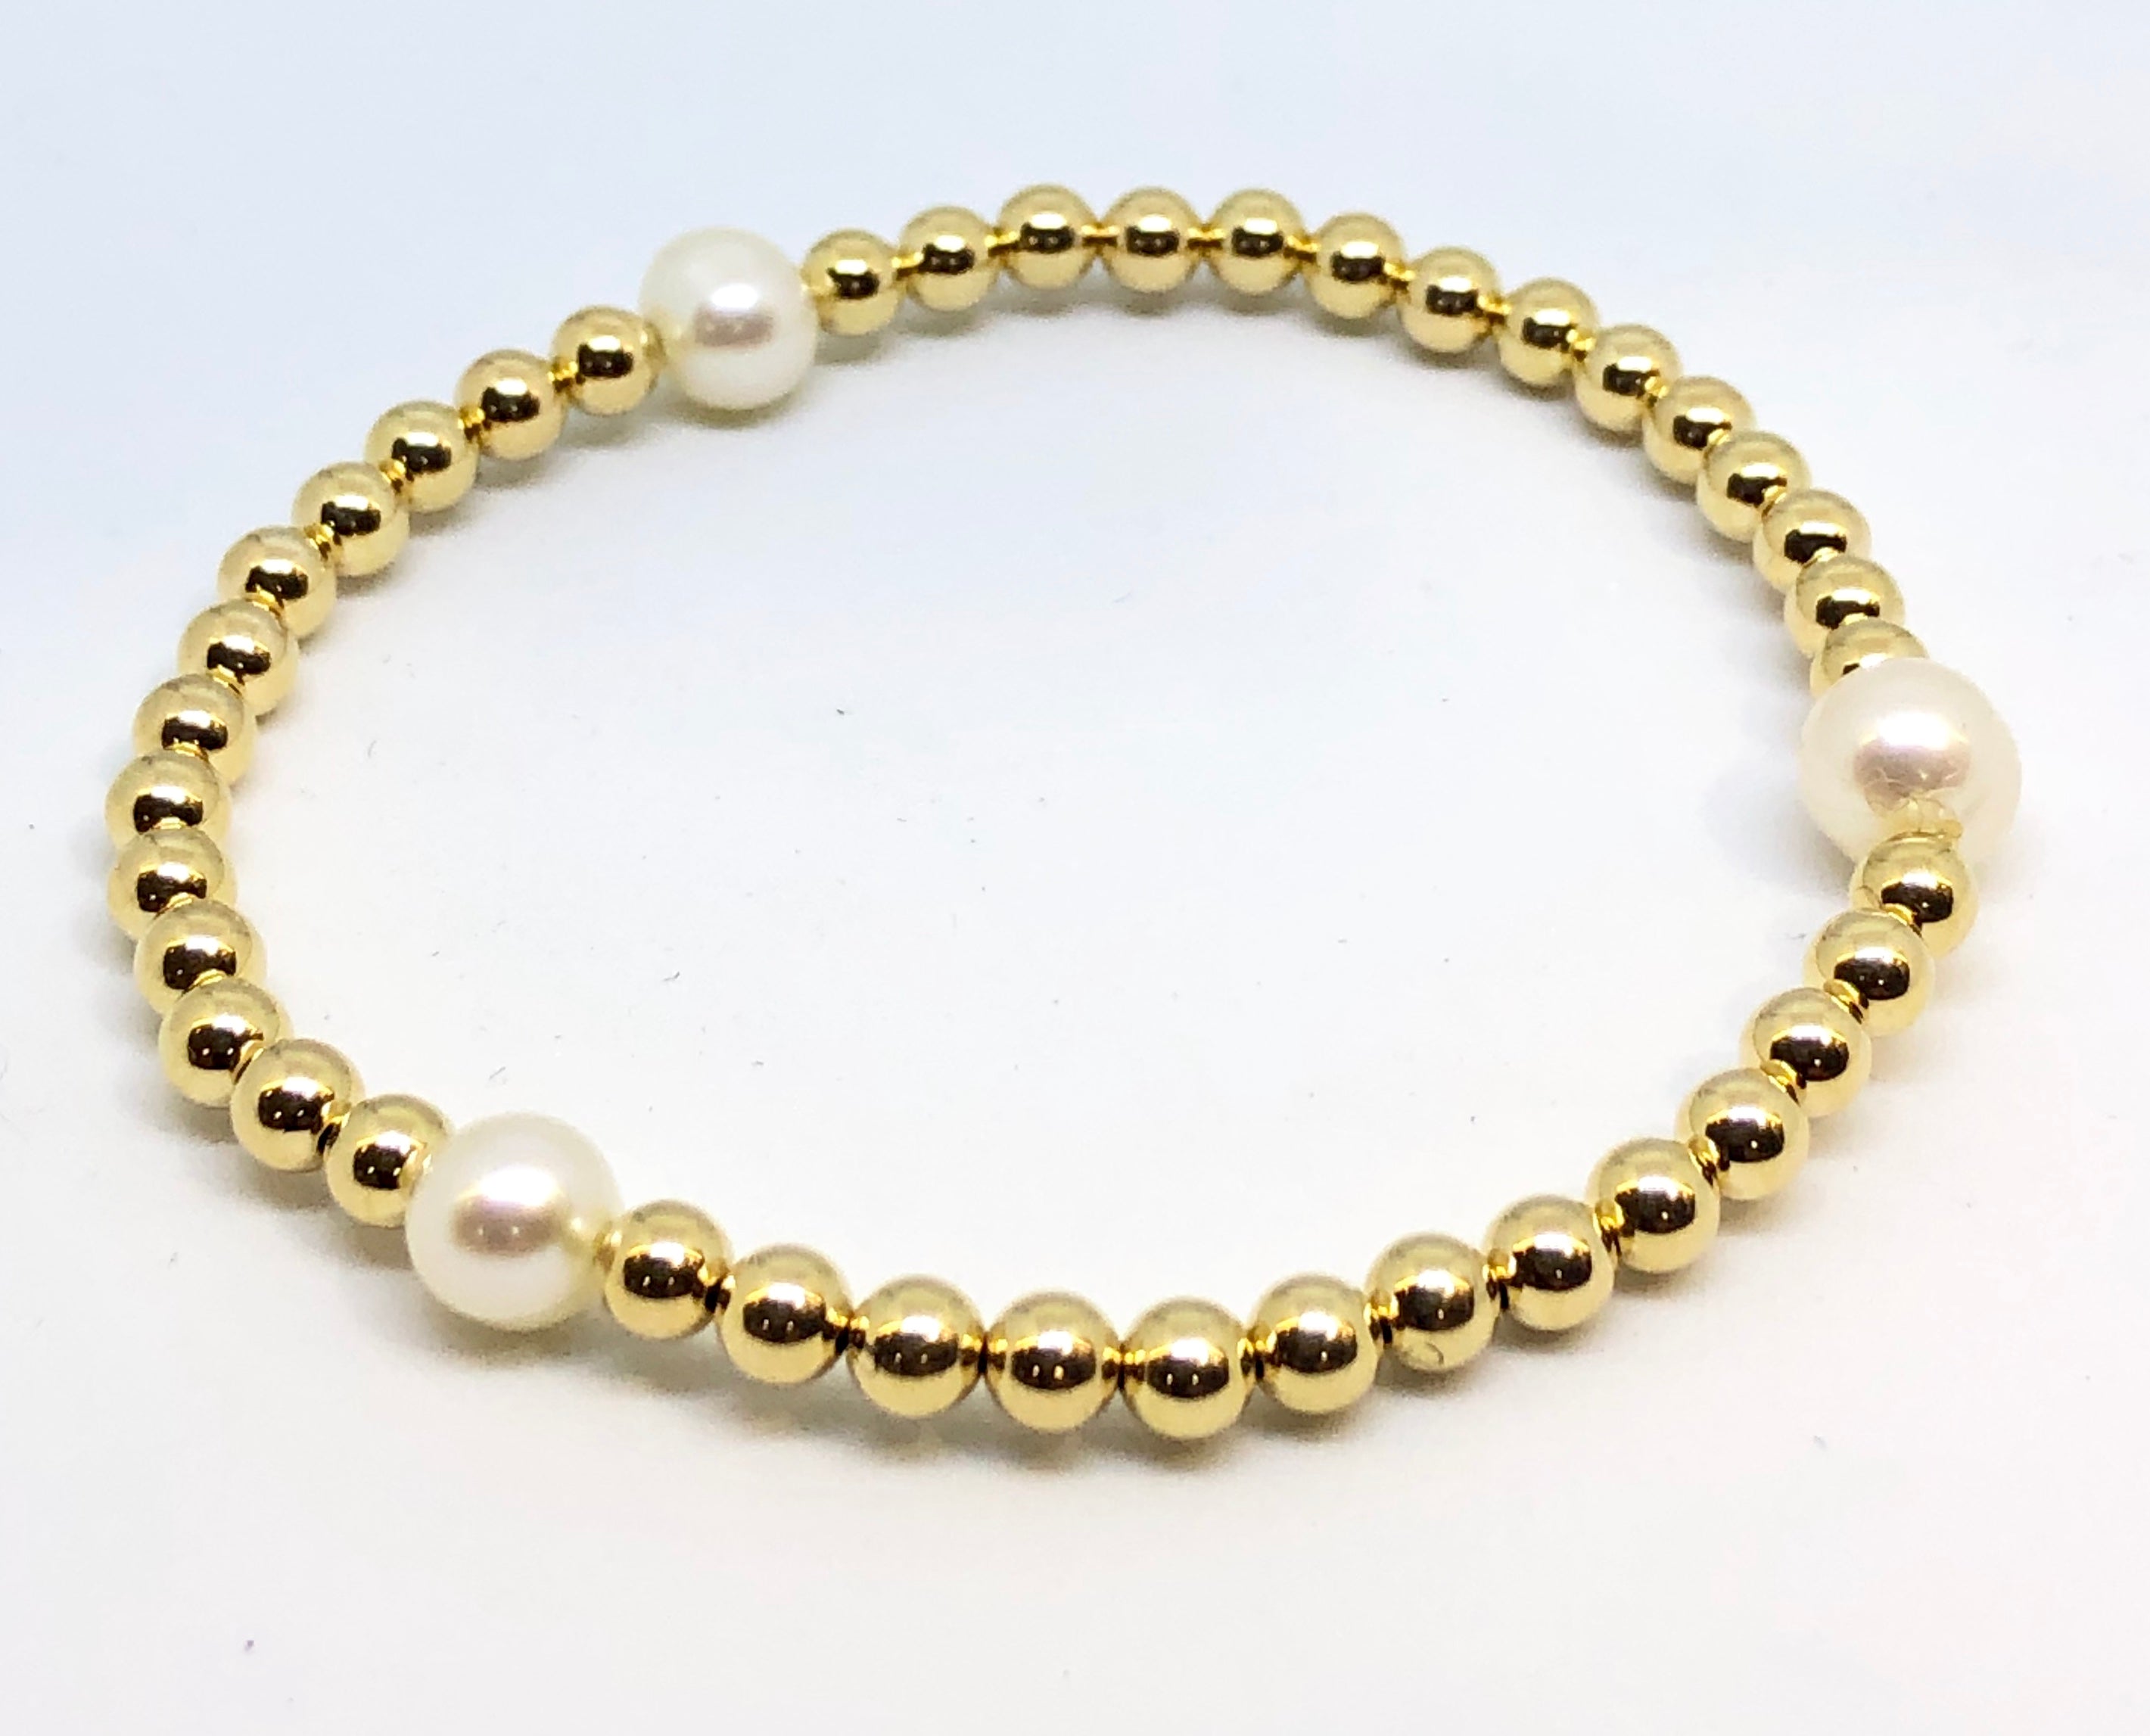 4mm 14kt Gold Filled Bead Bracelet with 3 6mm Fresh Water Pearls